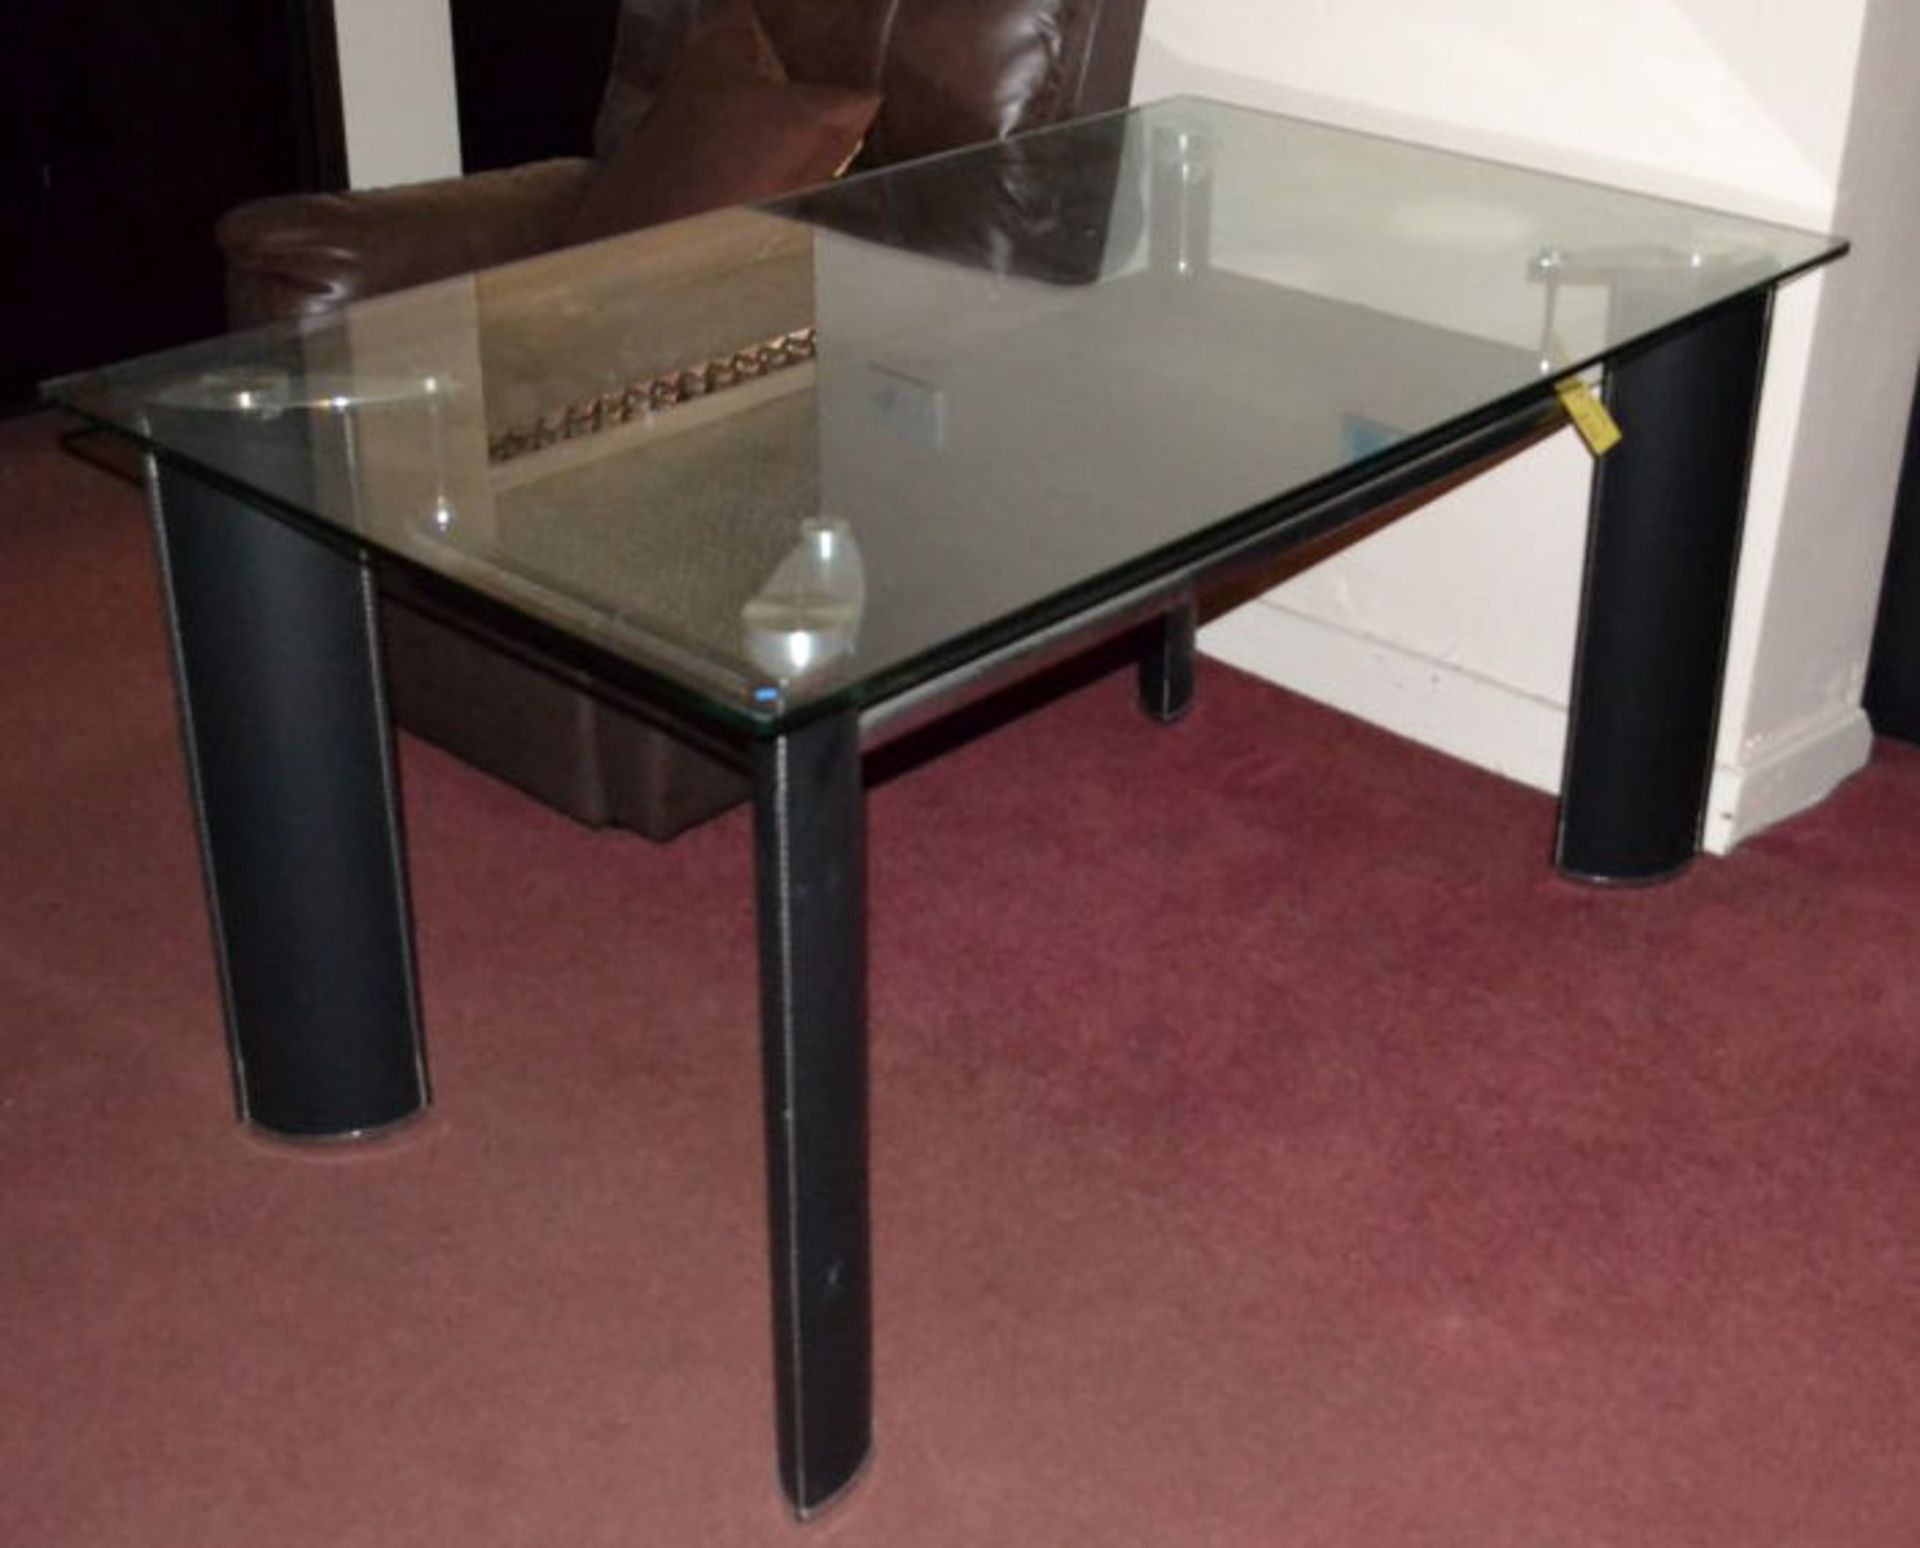 1 x Modern Glass Top Dining Table With Black Leather Legs